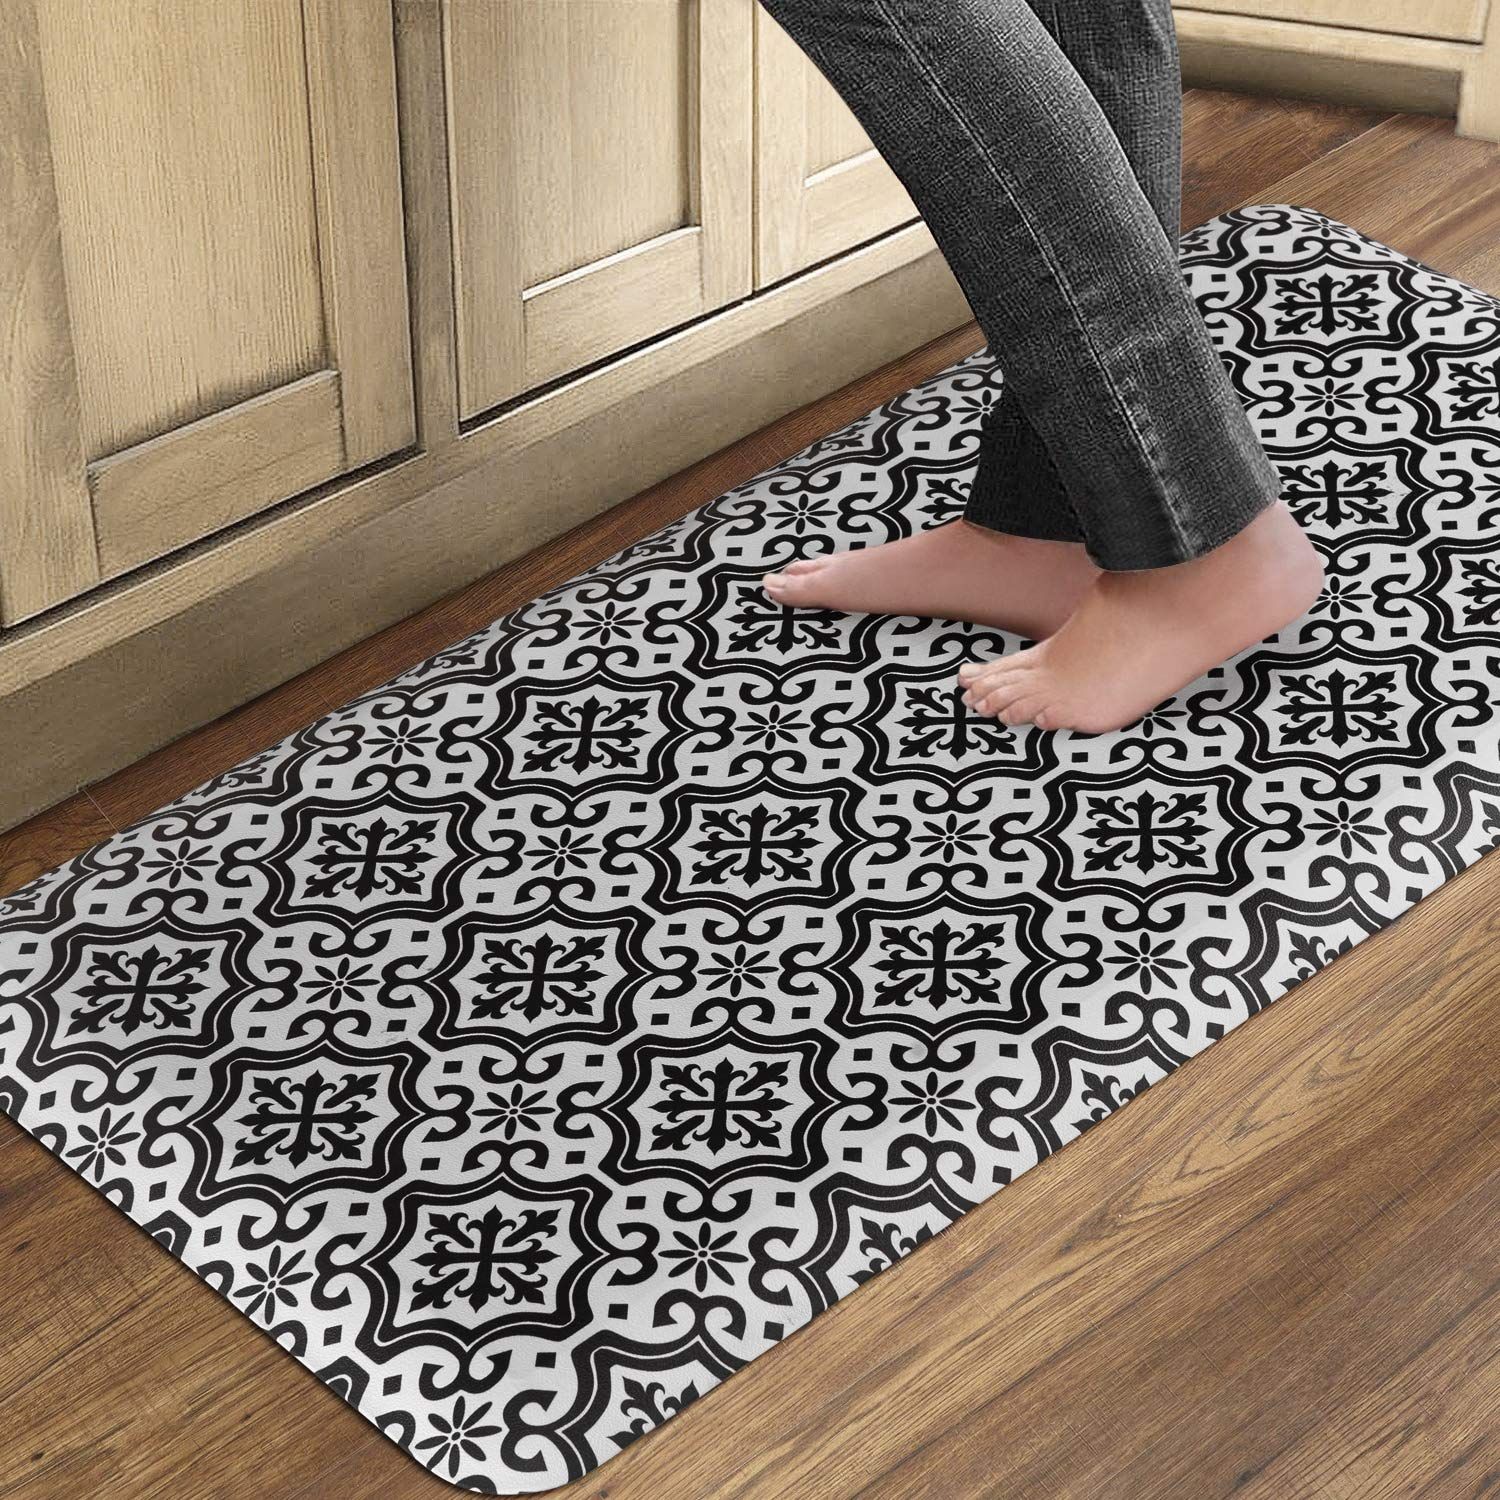 QSY Home Kitchen Anti Fatigue Floor Comfort Mats 20x39x3/4-Inch Non Skid Thick Cushioned Rugs for St | Amazon (US)